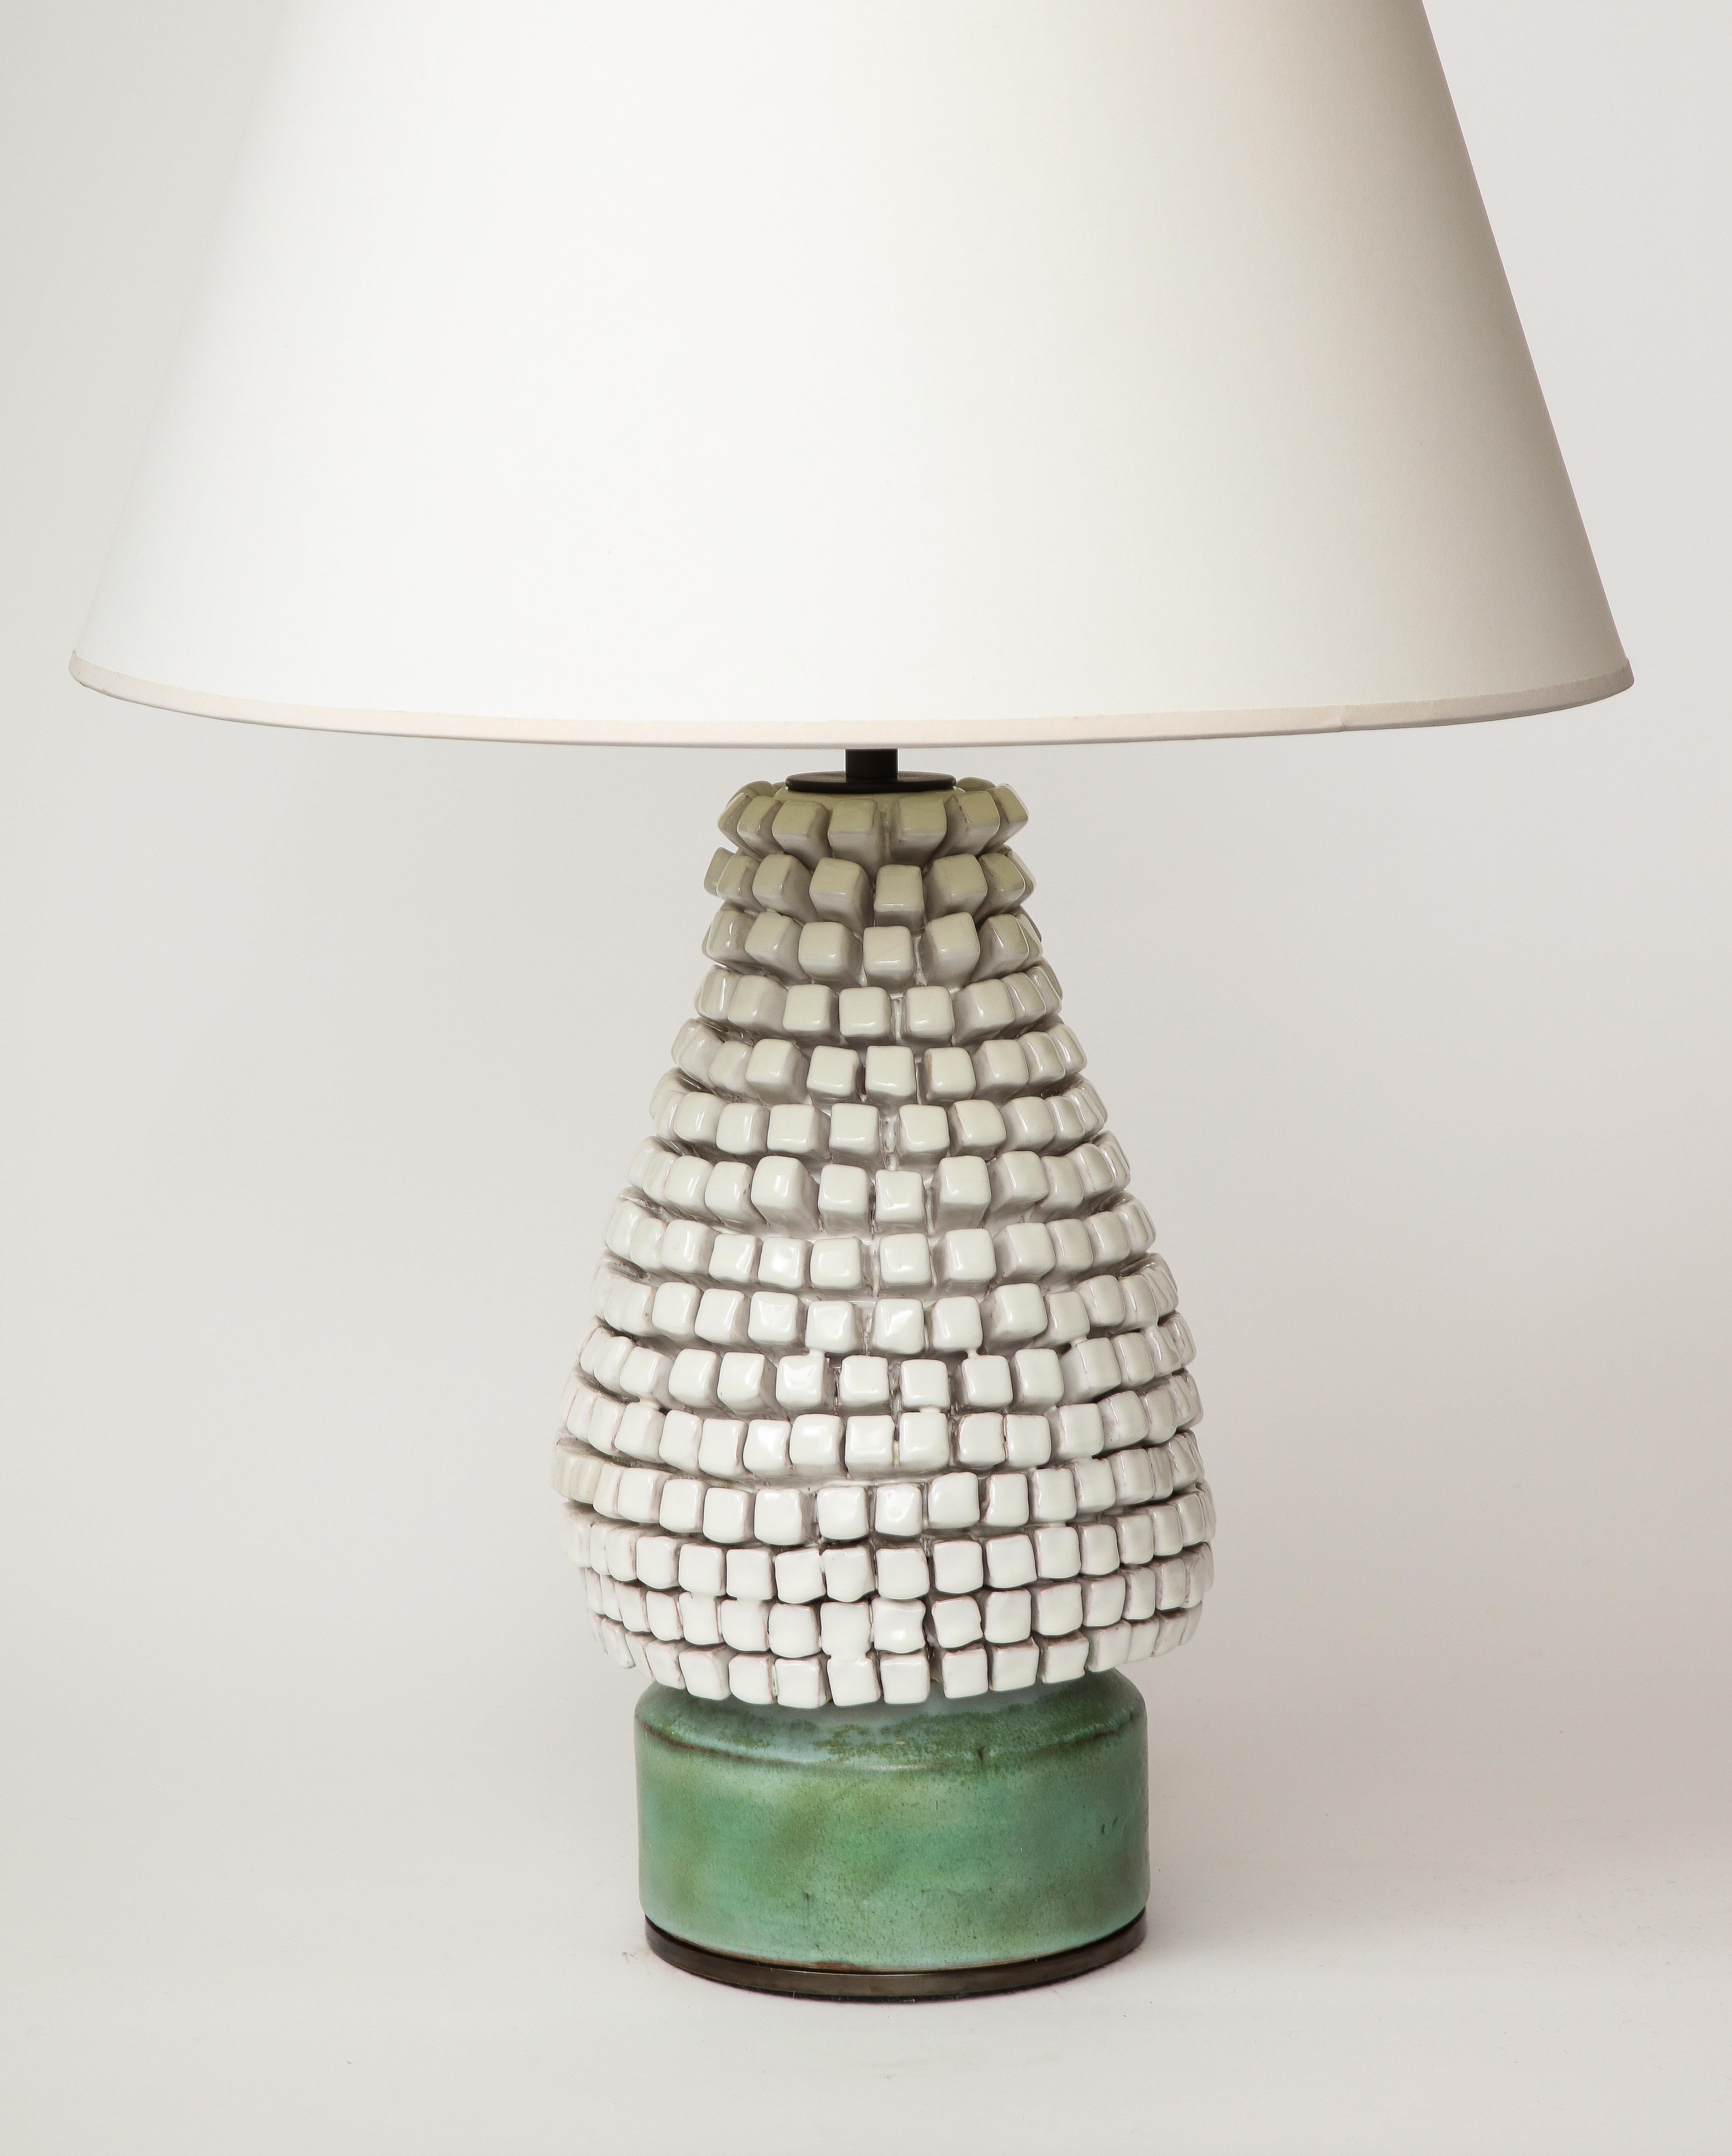 Unique, sculptural glazed ceramic table lamp. Newly rewired with a dimmer, black twisted silk cord, adjustable shade hard, and on/off switch at the cord.